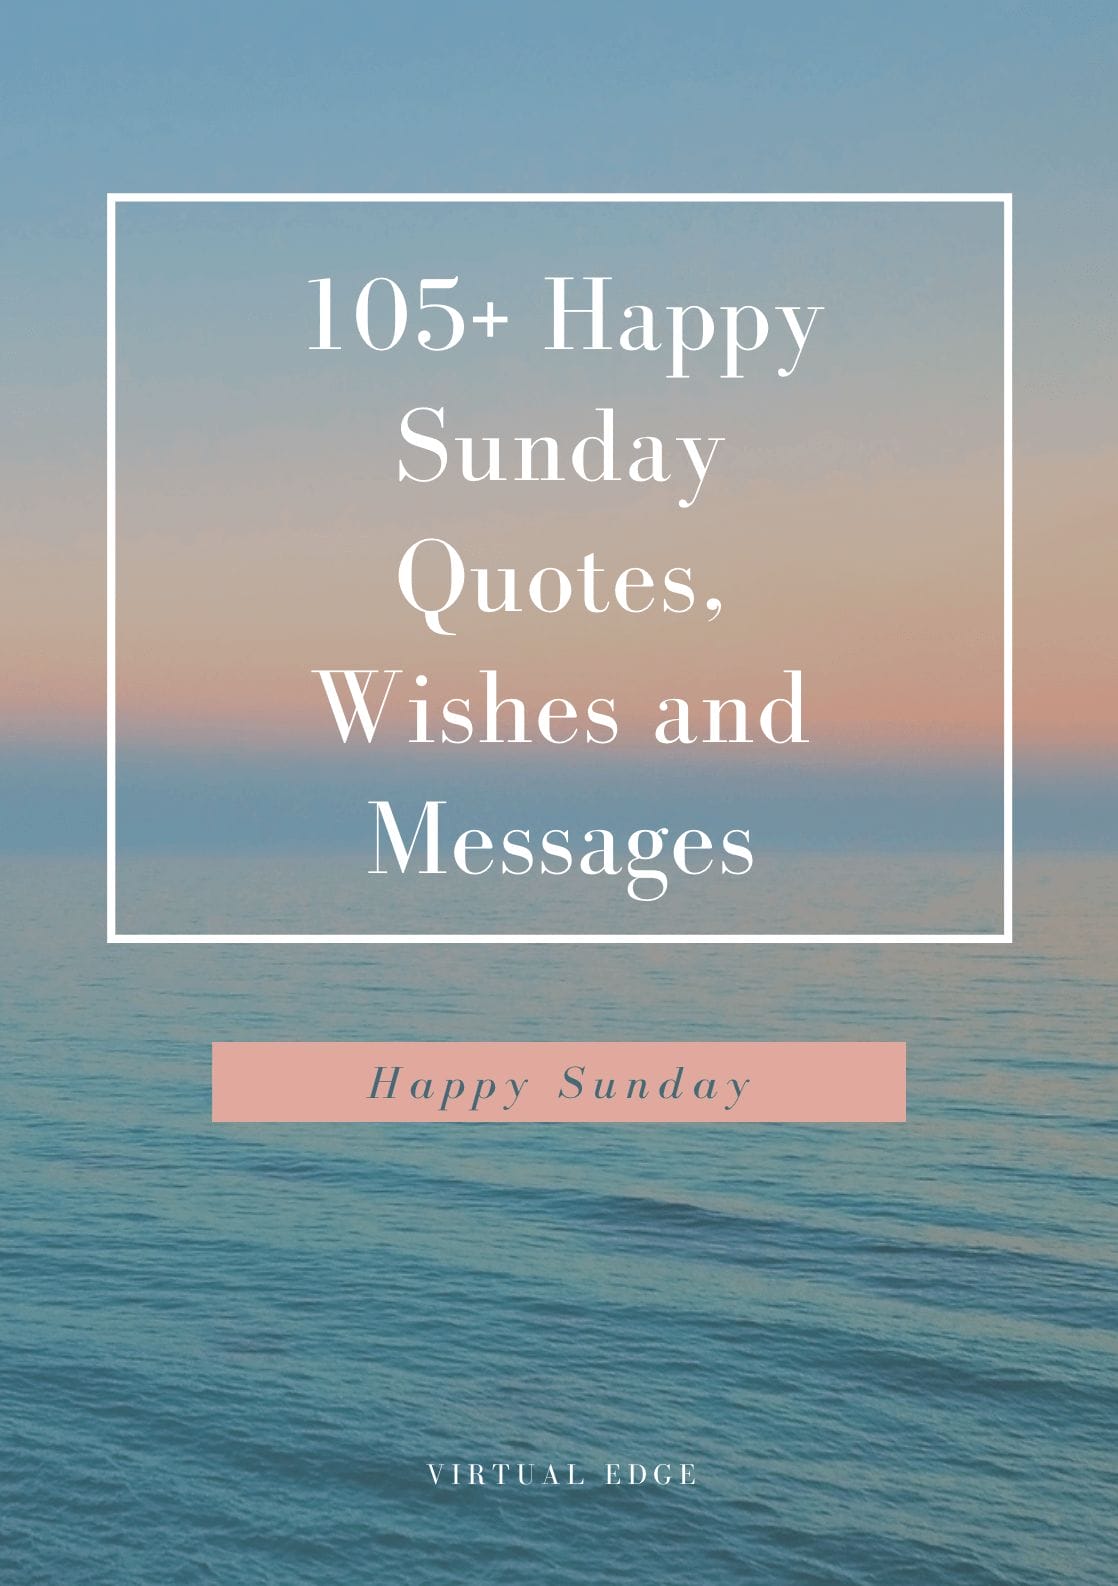 105+ Happy Sunday Quotes, Wishes and Messages | Virtual Edge